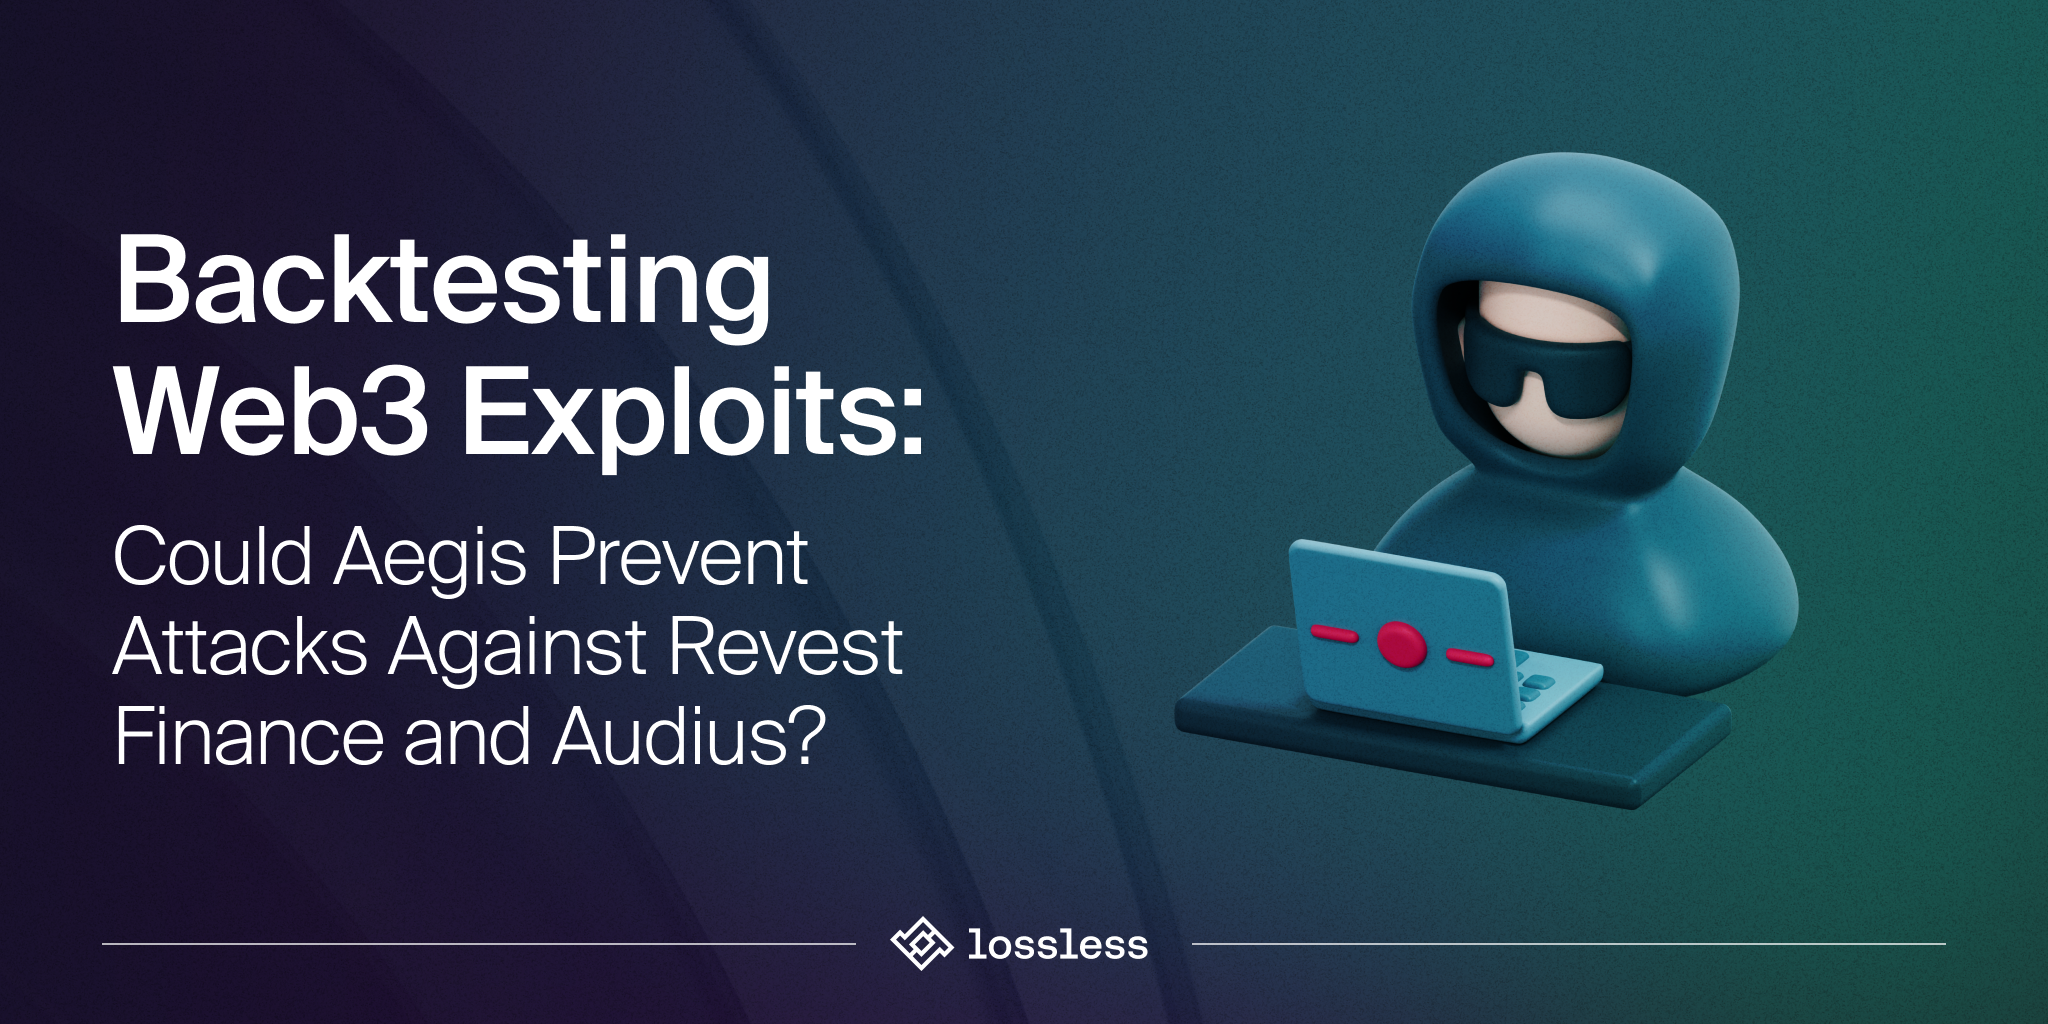 Backtesting Web3 Exploits: Could Aegis Prevent Attacks Against Revest Finance and Audius?